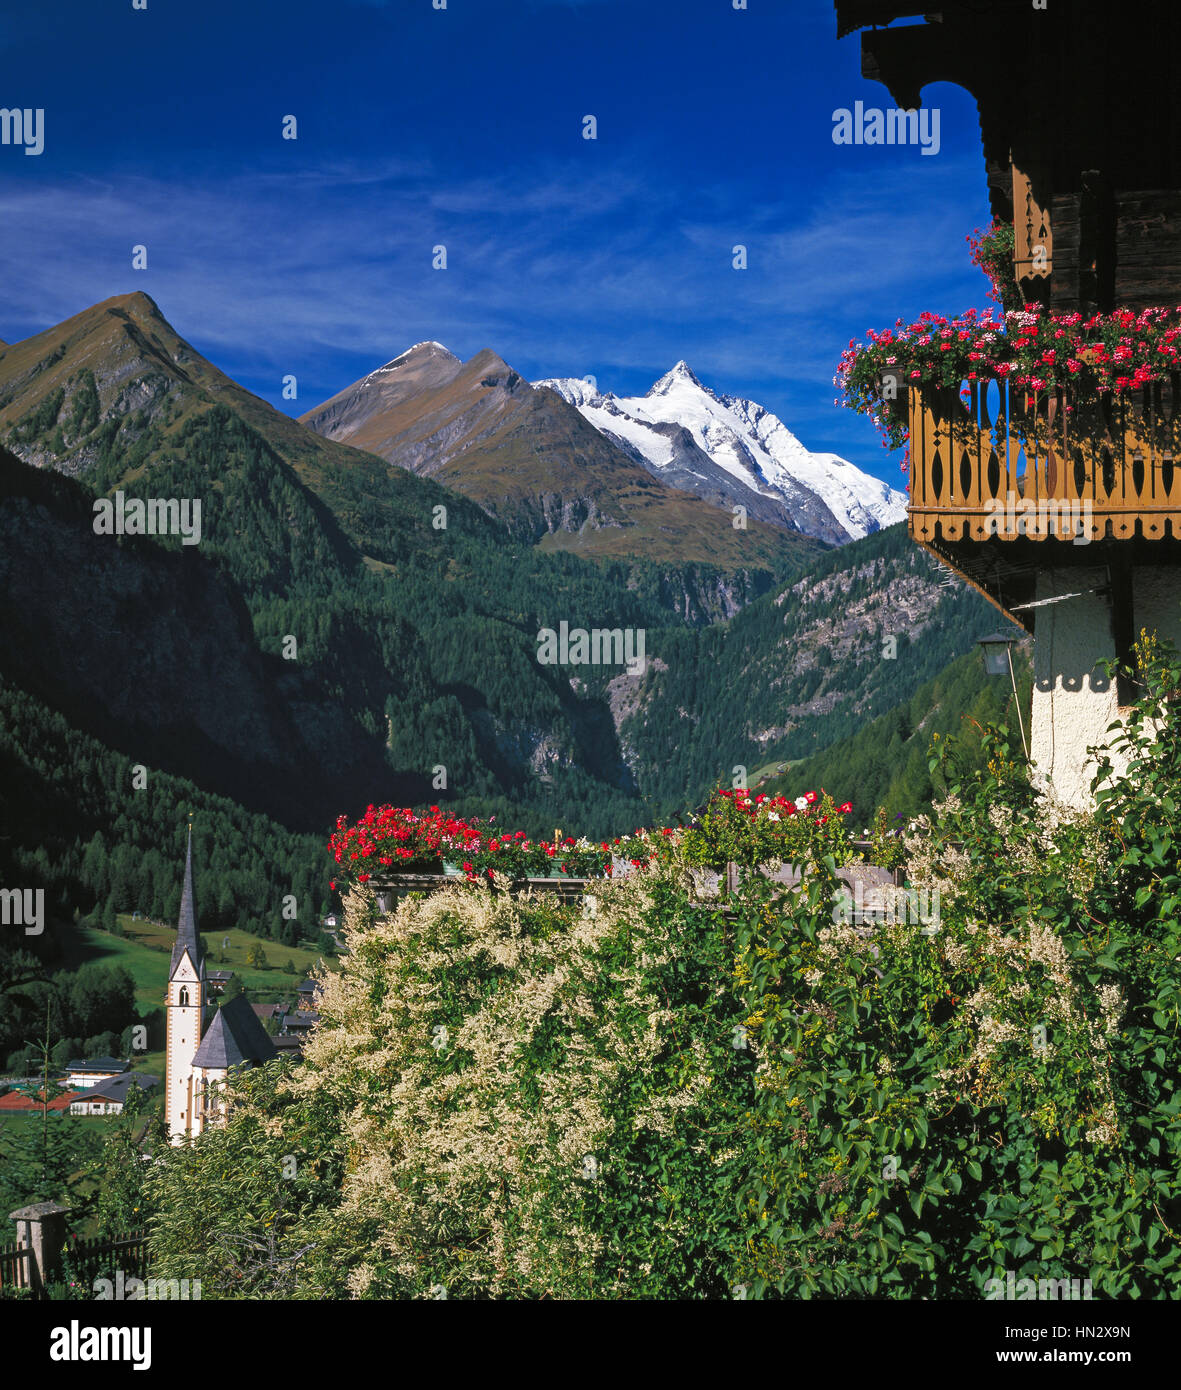 Tirolean house with balcony in Heiligenblut, snow capped Grossglockner mountain in distance, Carinthia, Austria. Stock Photo